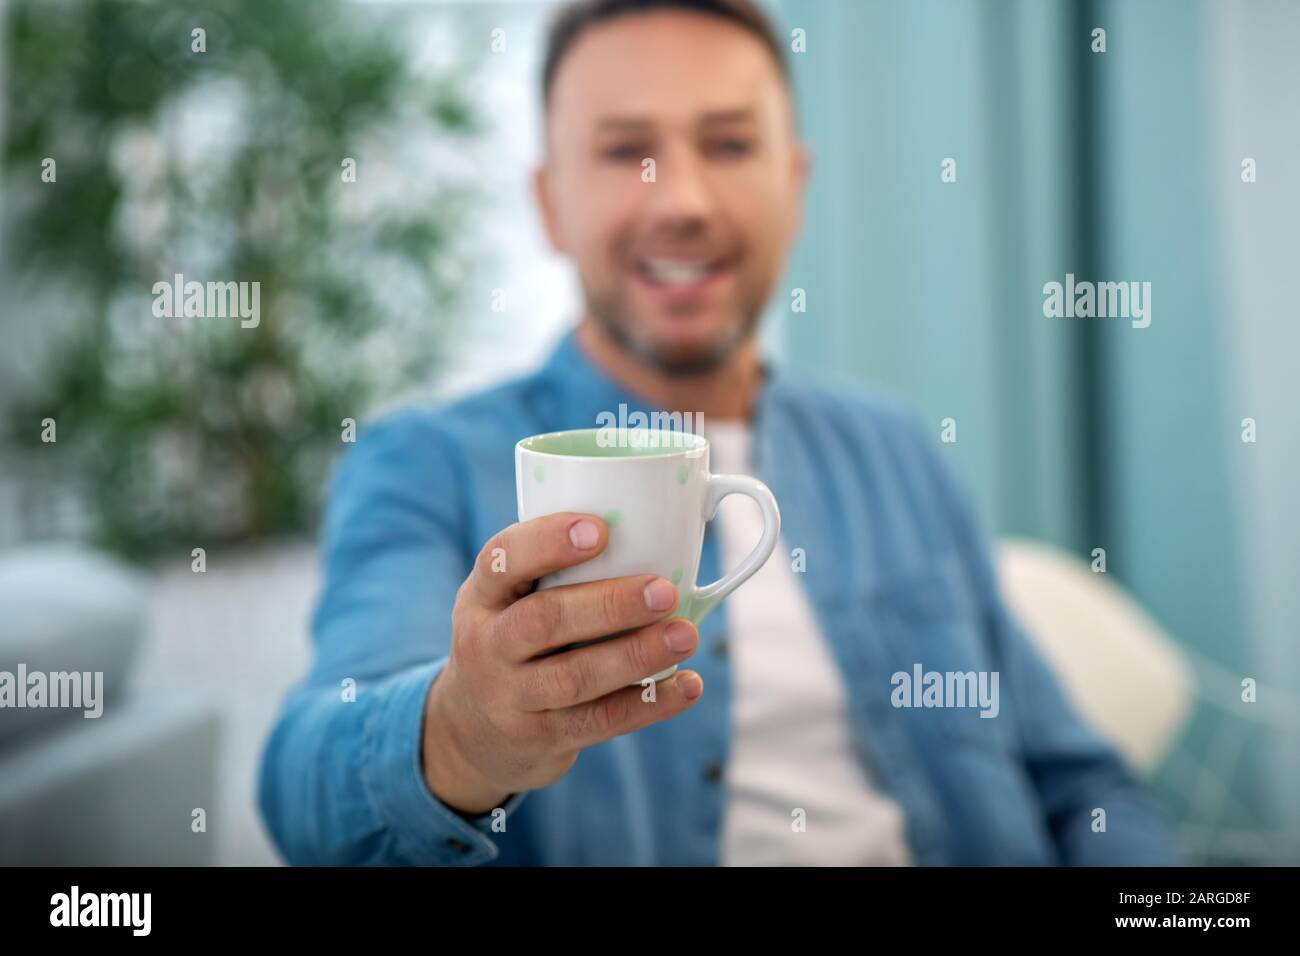 Cup of tea in the man's outstretched hand. Stock Photo